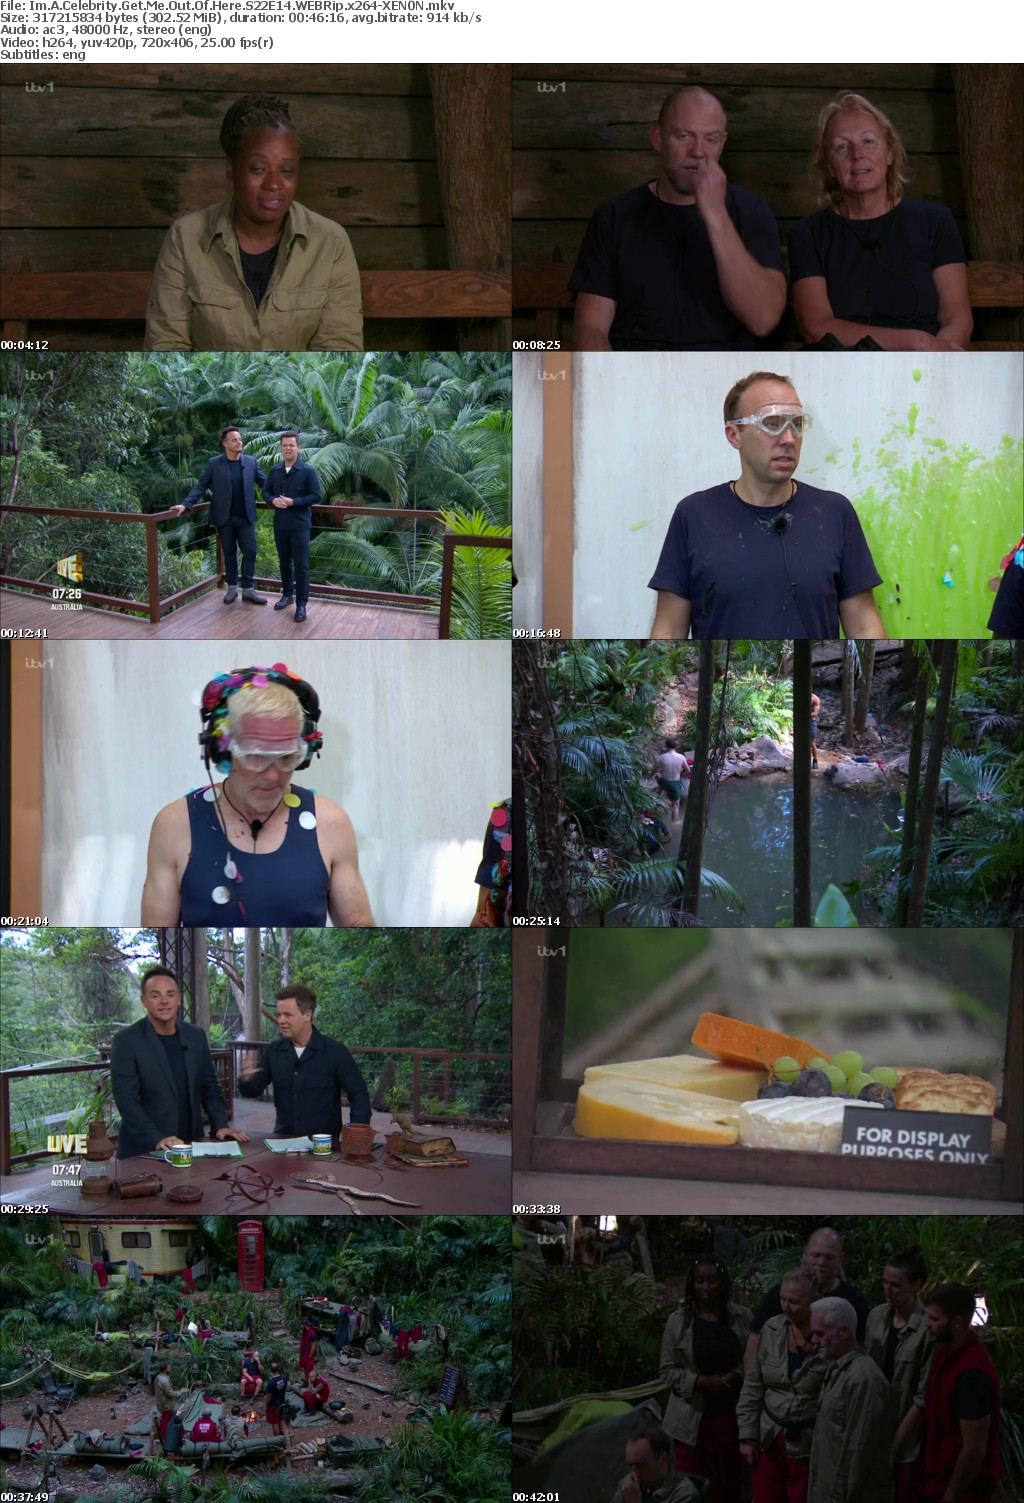 Im A Celebrity Get Me Out Of Here S22E14 WEBRip x264-XEN0N